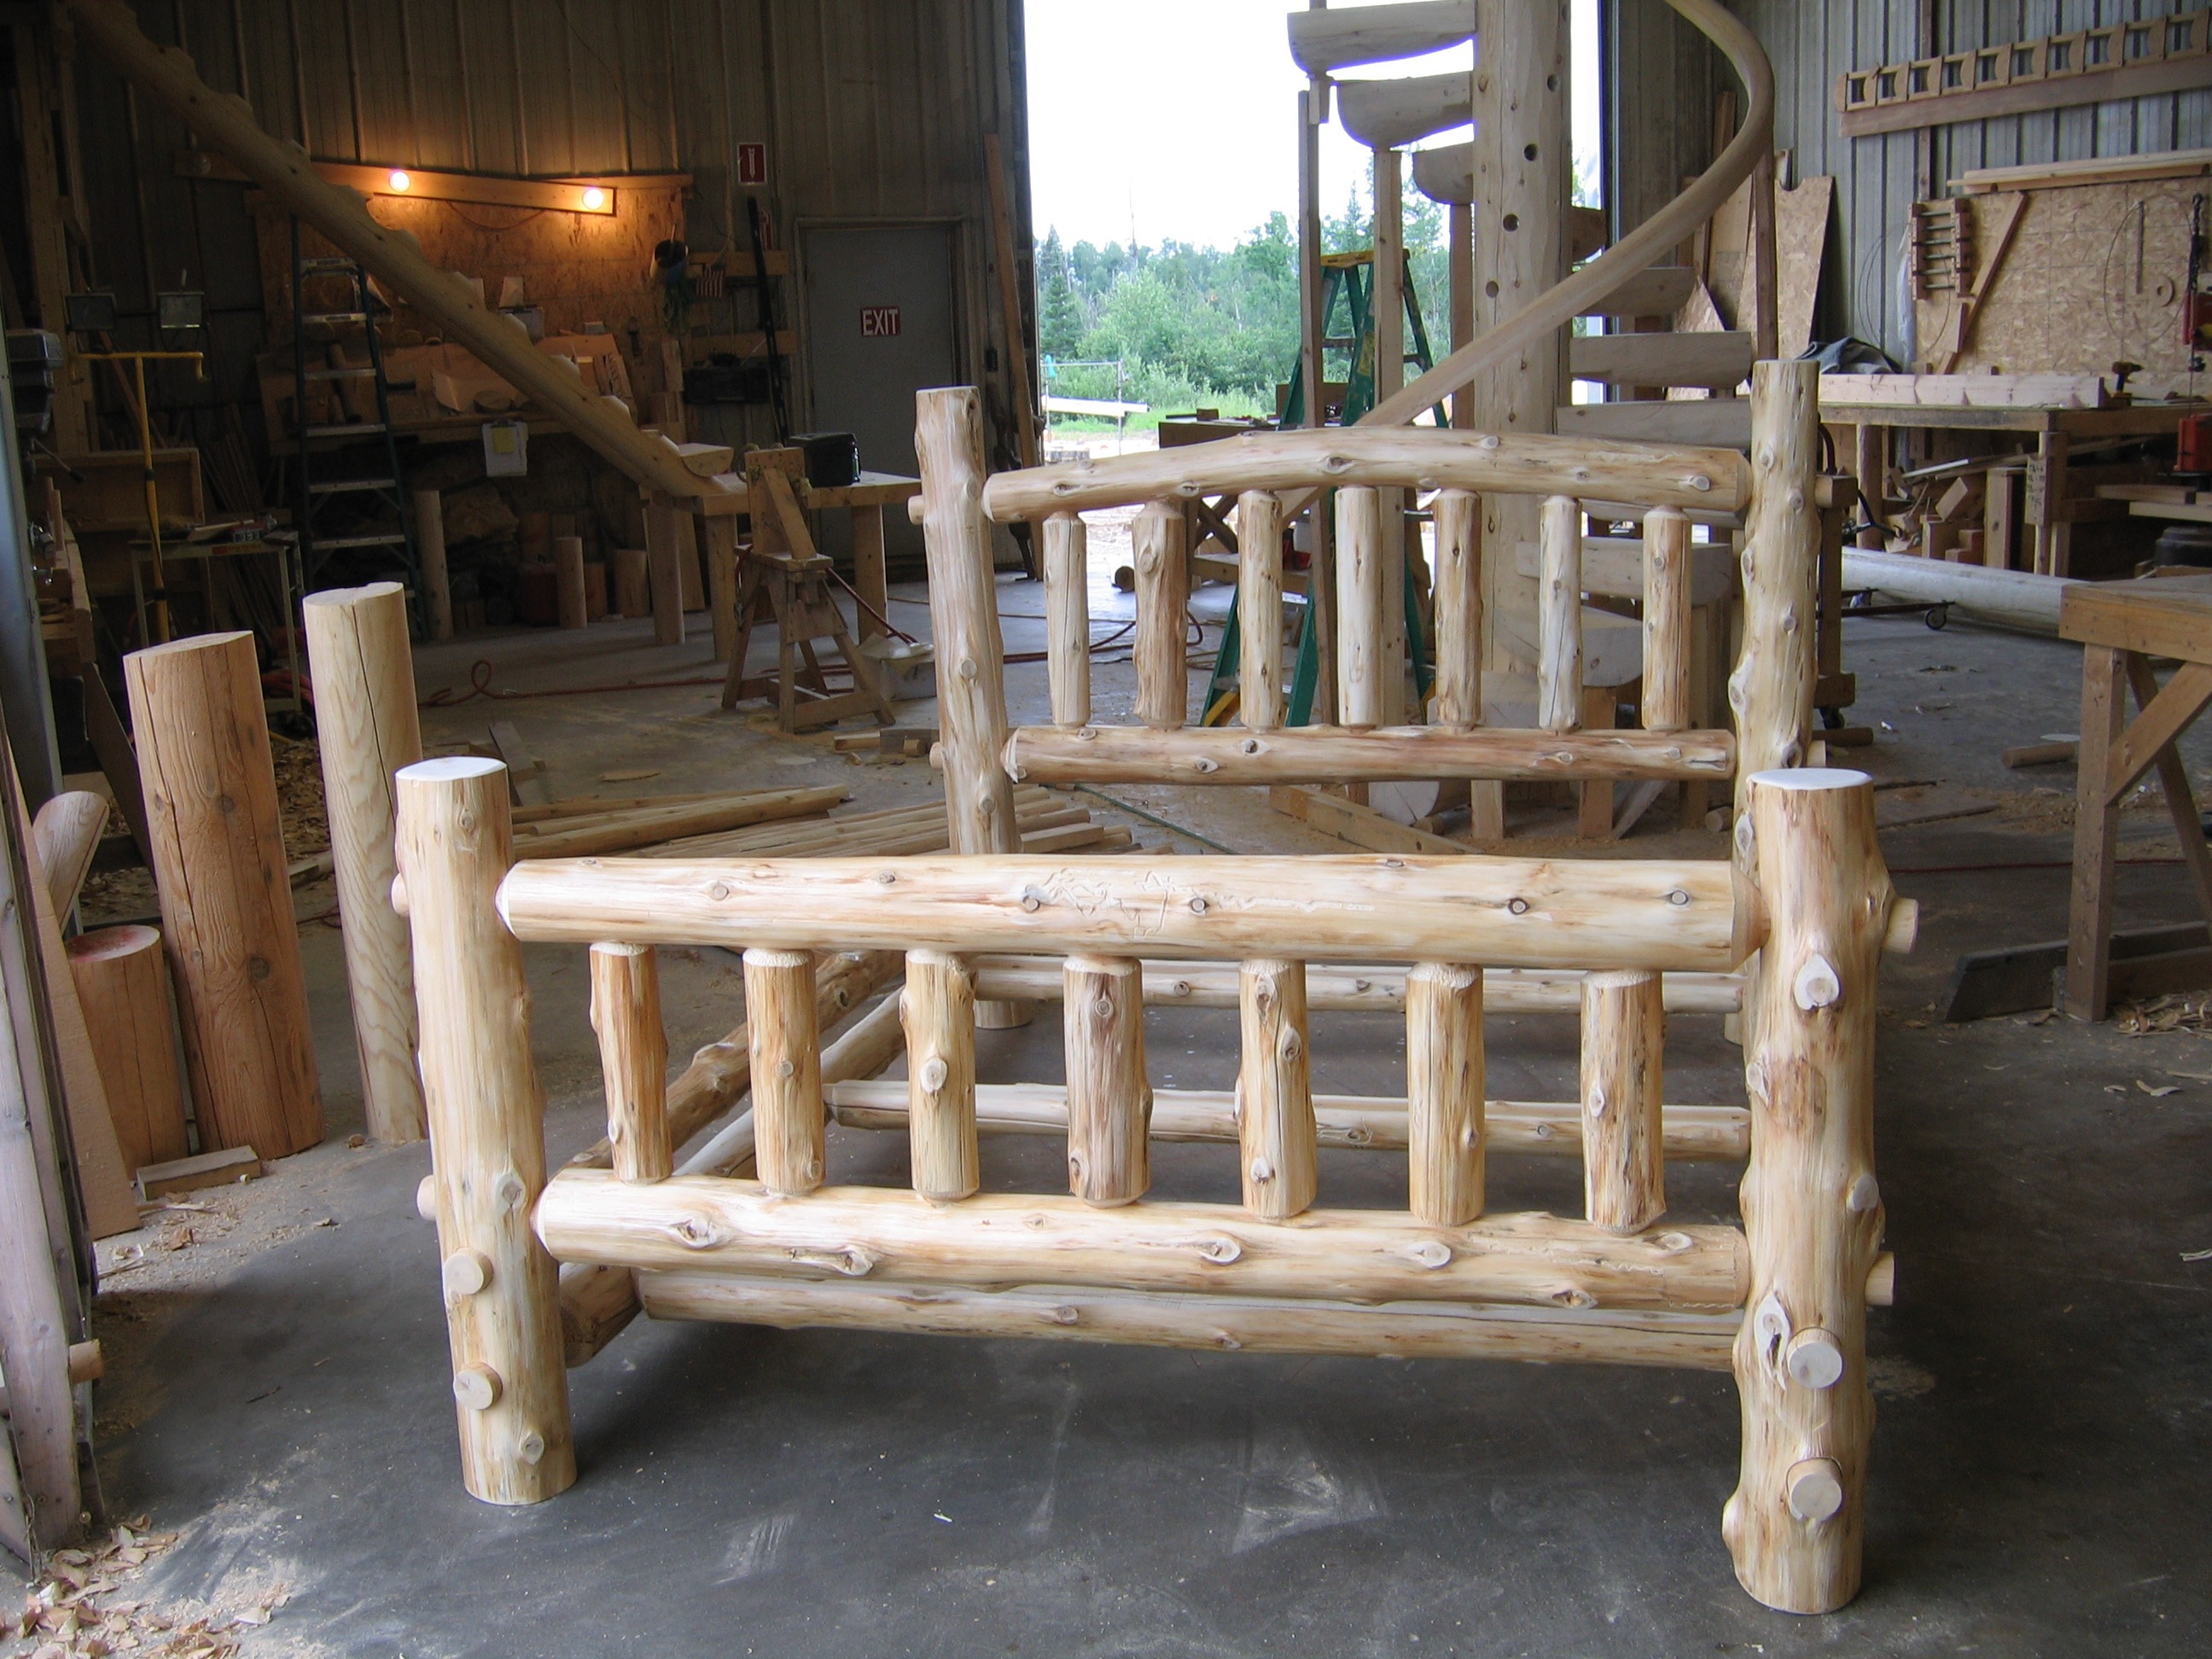 custom Rustic bed frame being made from timber logs